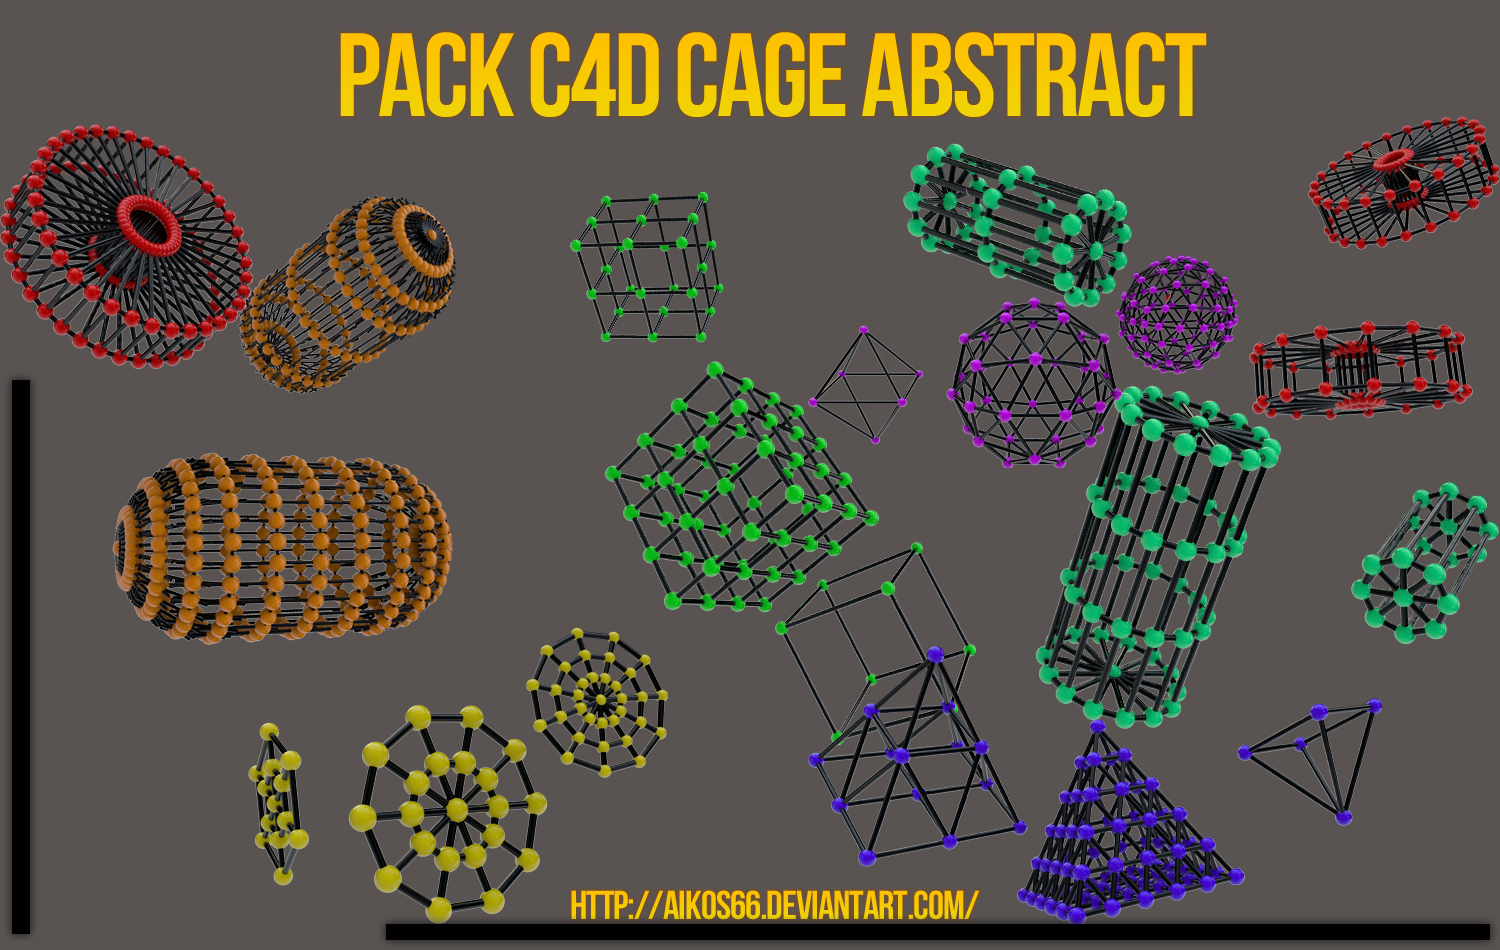 pack_c4d_cage_abstract_by_aikos66-d4vqy84